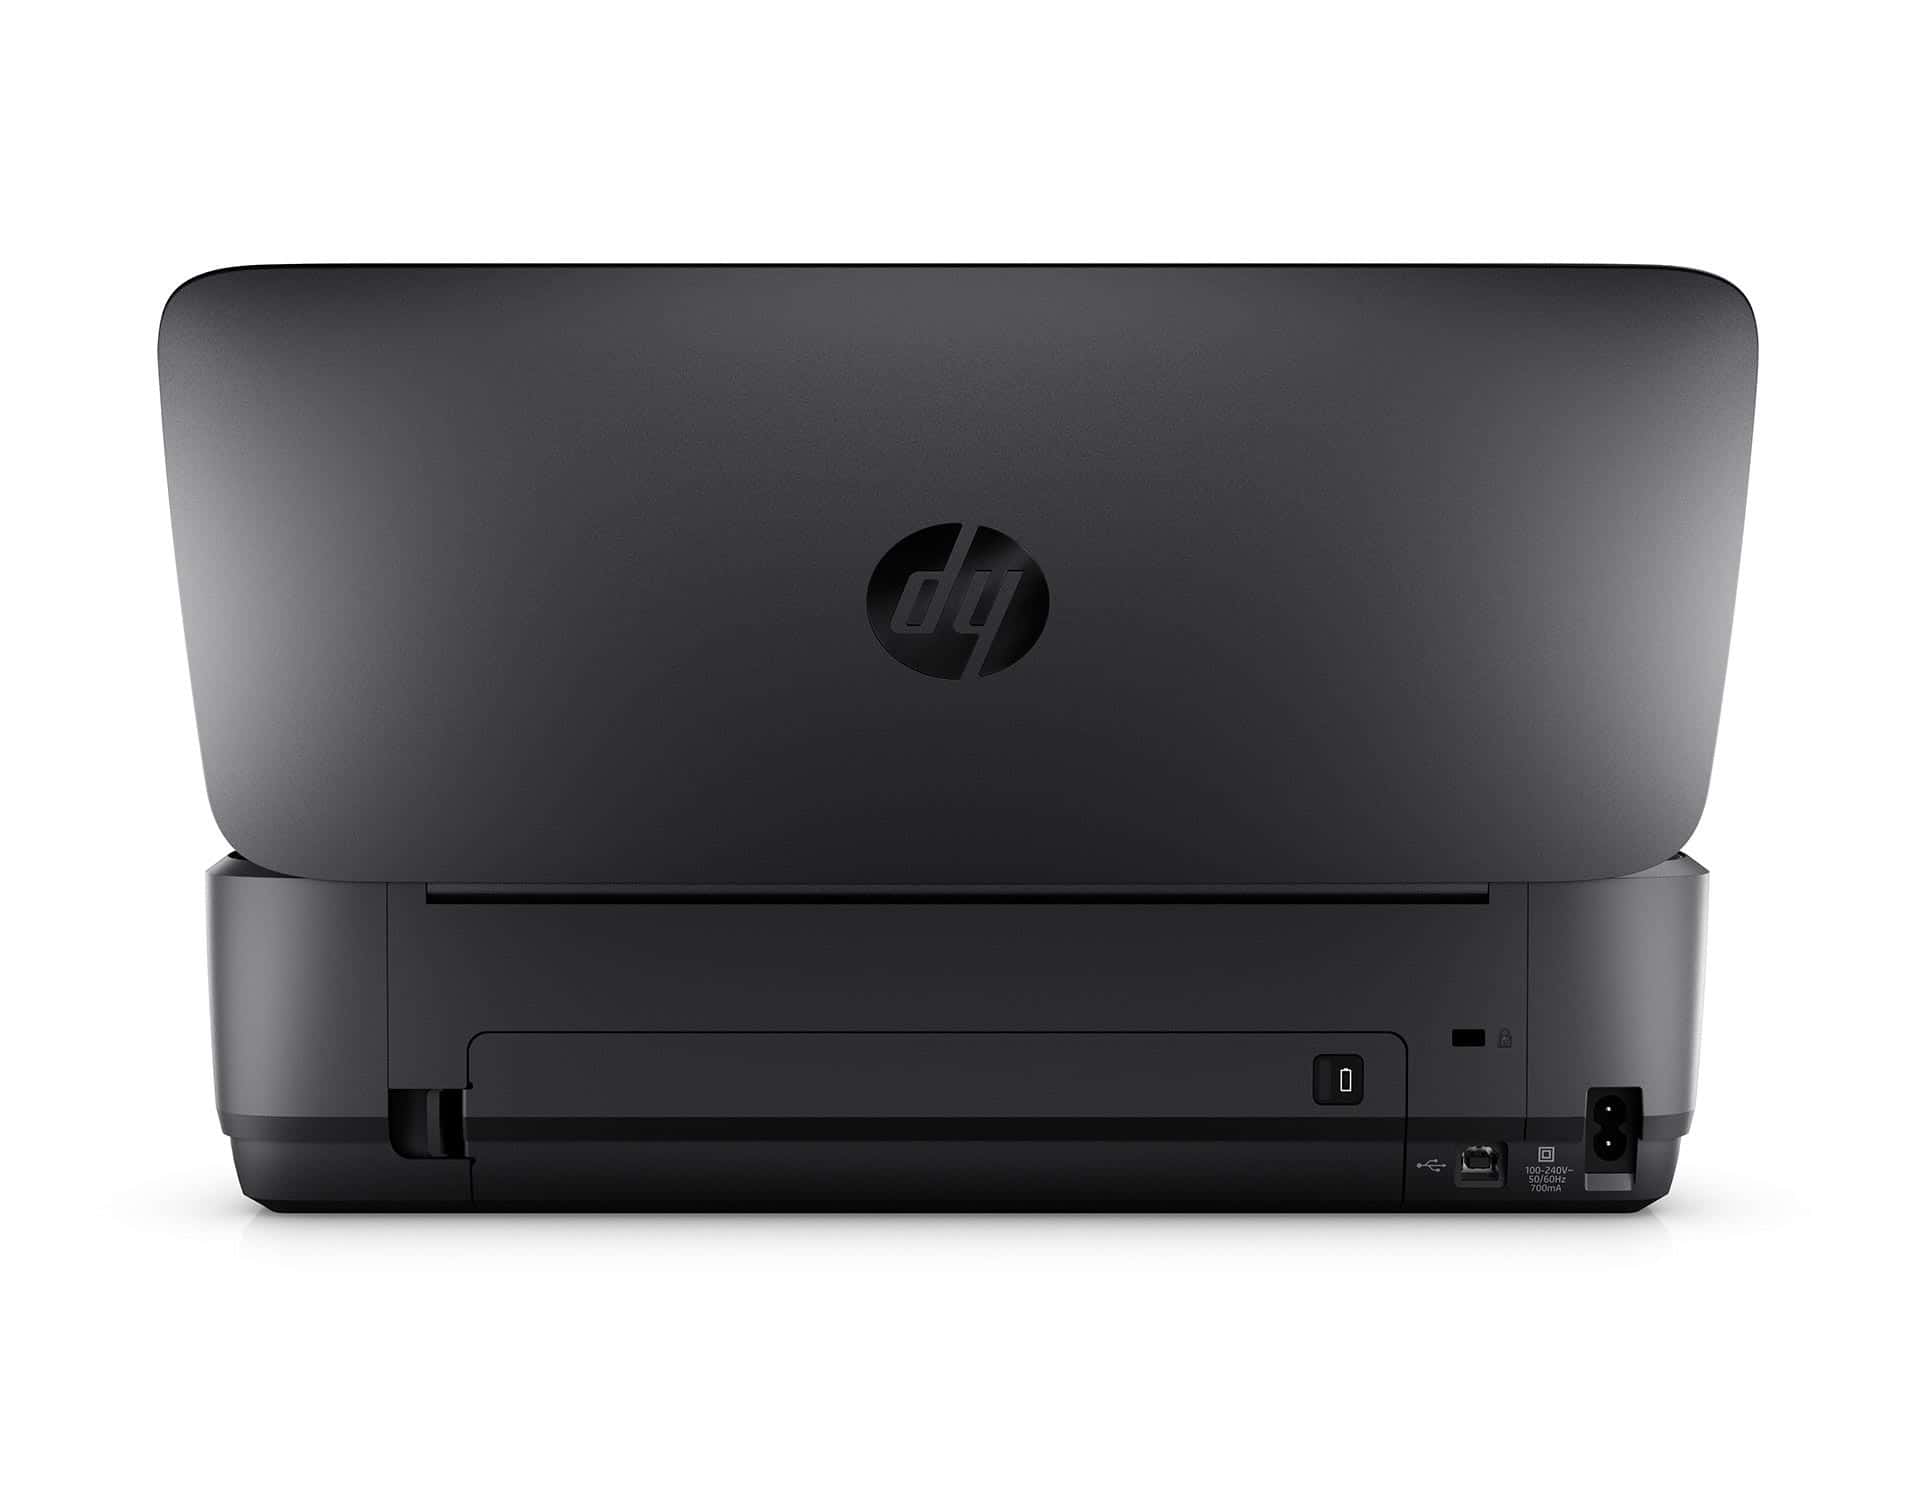 HP OFFICEJET 250 MOBILE AIO コンパクトプリンタ複合機